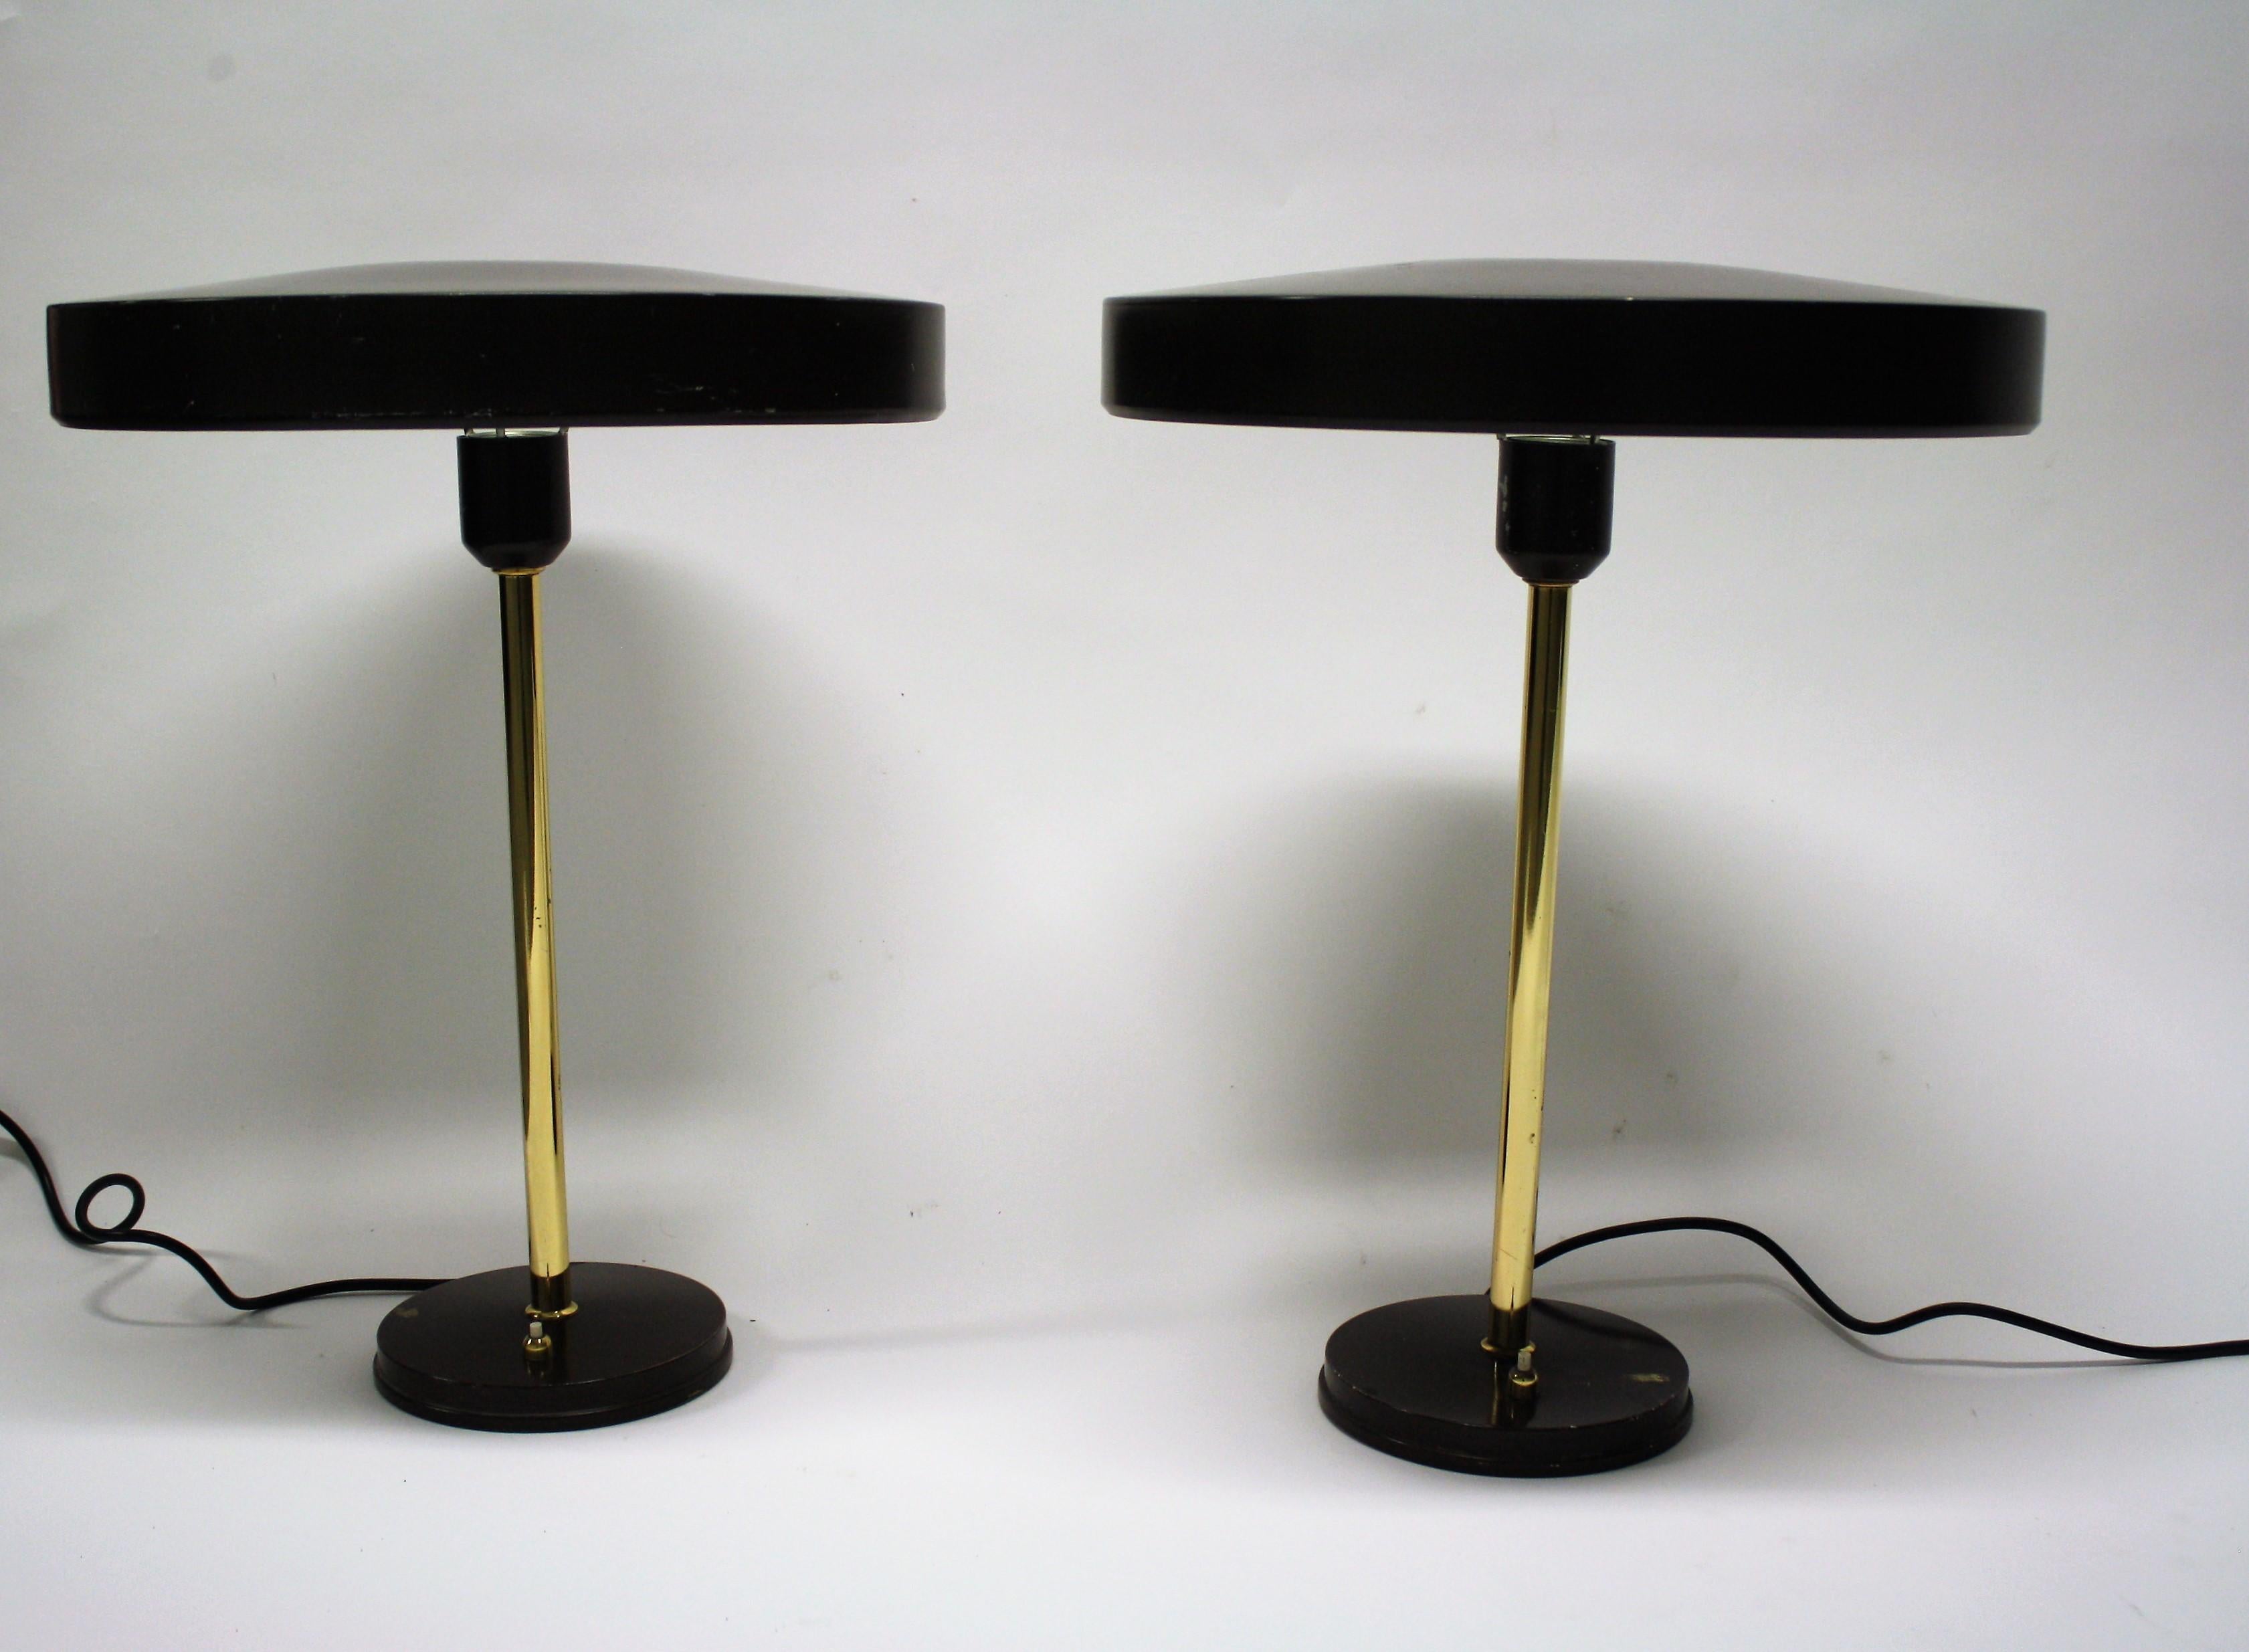 Pair of 'Timor' desk lamp designed by Louis Kalff for Philips.

The lamps have an ufo like lamp shade made from aluminium and enamel mounted on a brass rod.

The lamps are in a good condition with some user traces on the side of the lamp shades